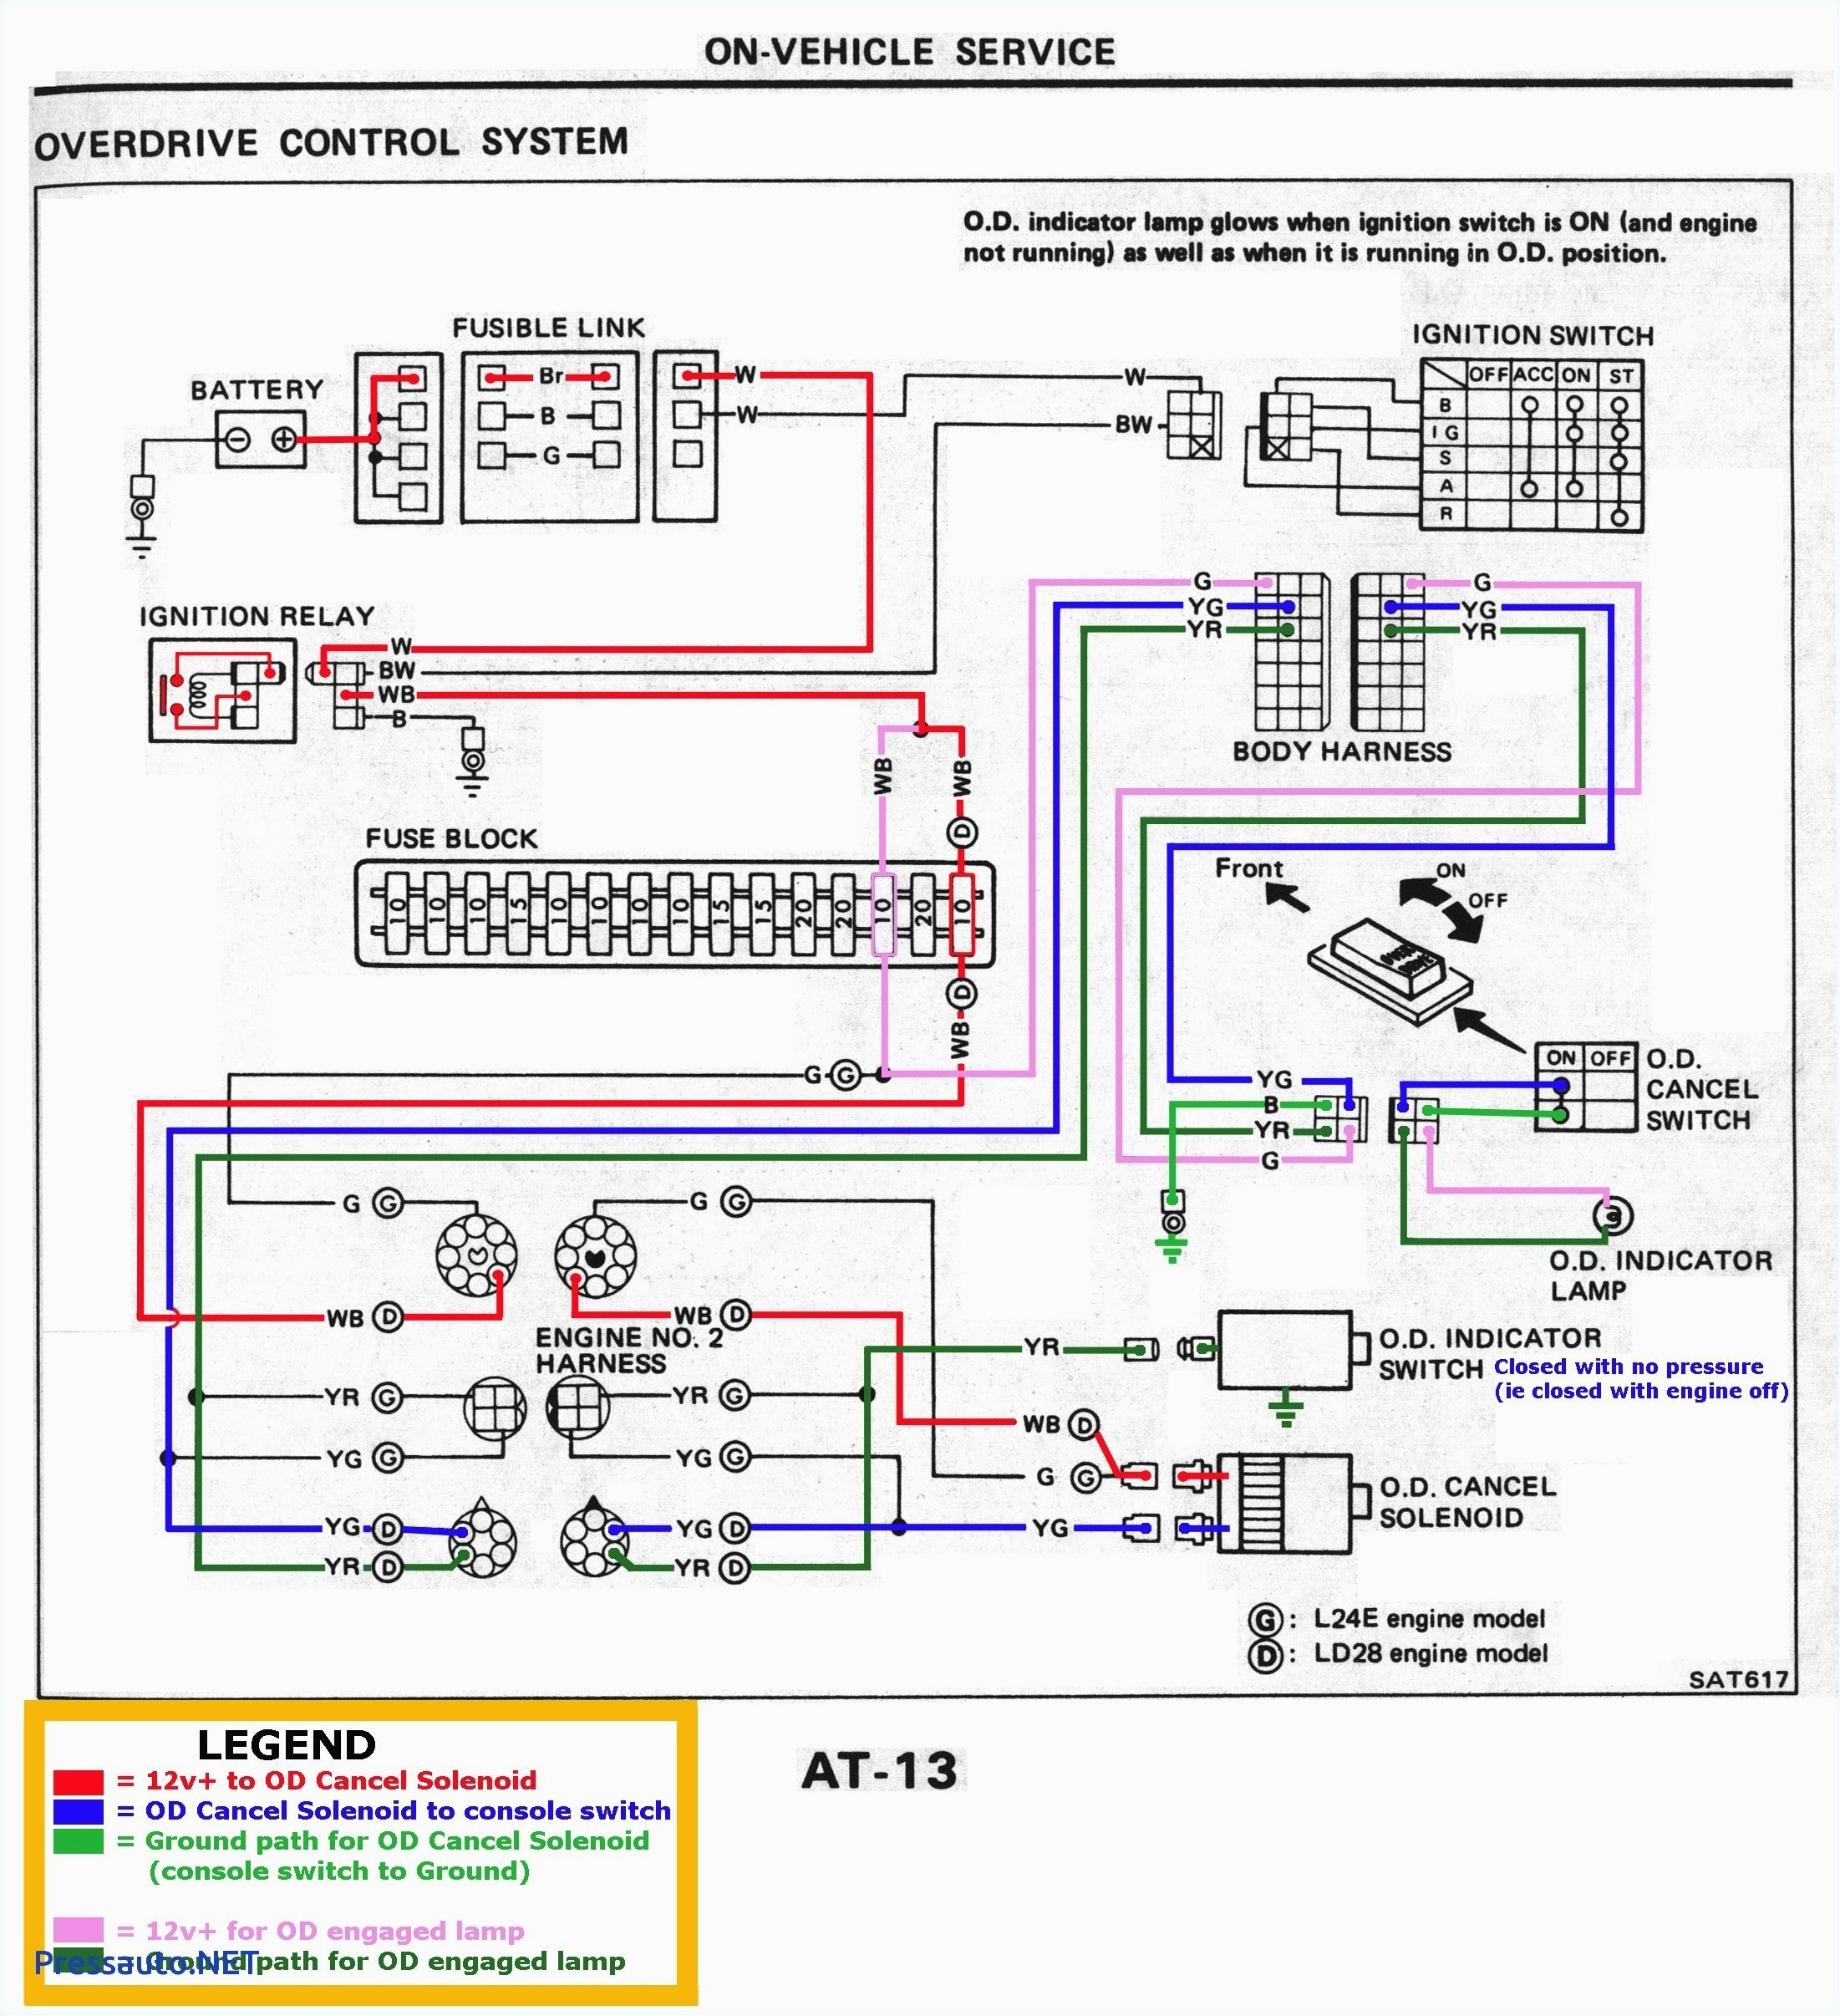 kio wiring harness for 1986 wiring diagrams show kio wiring harness for 1986